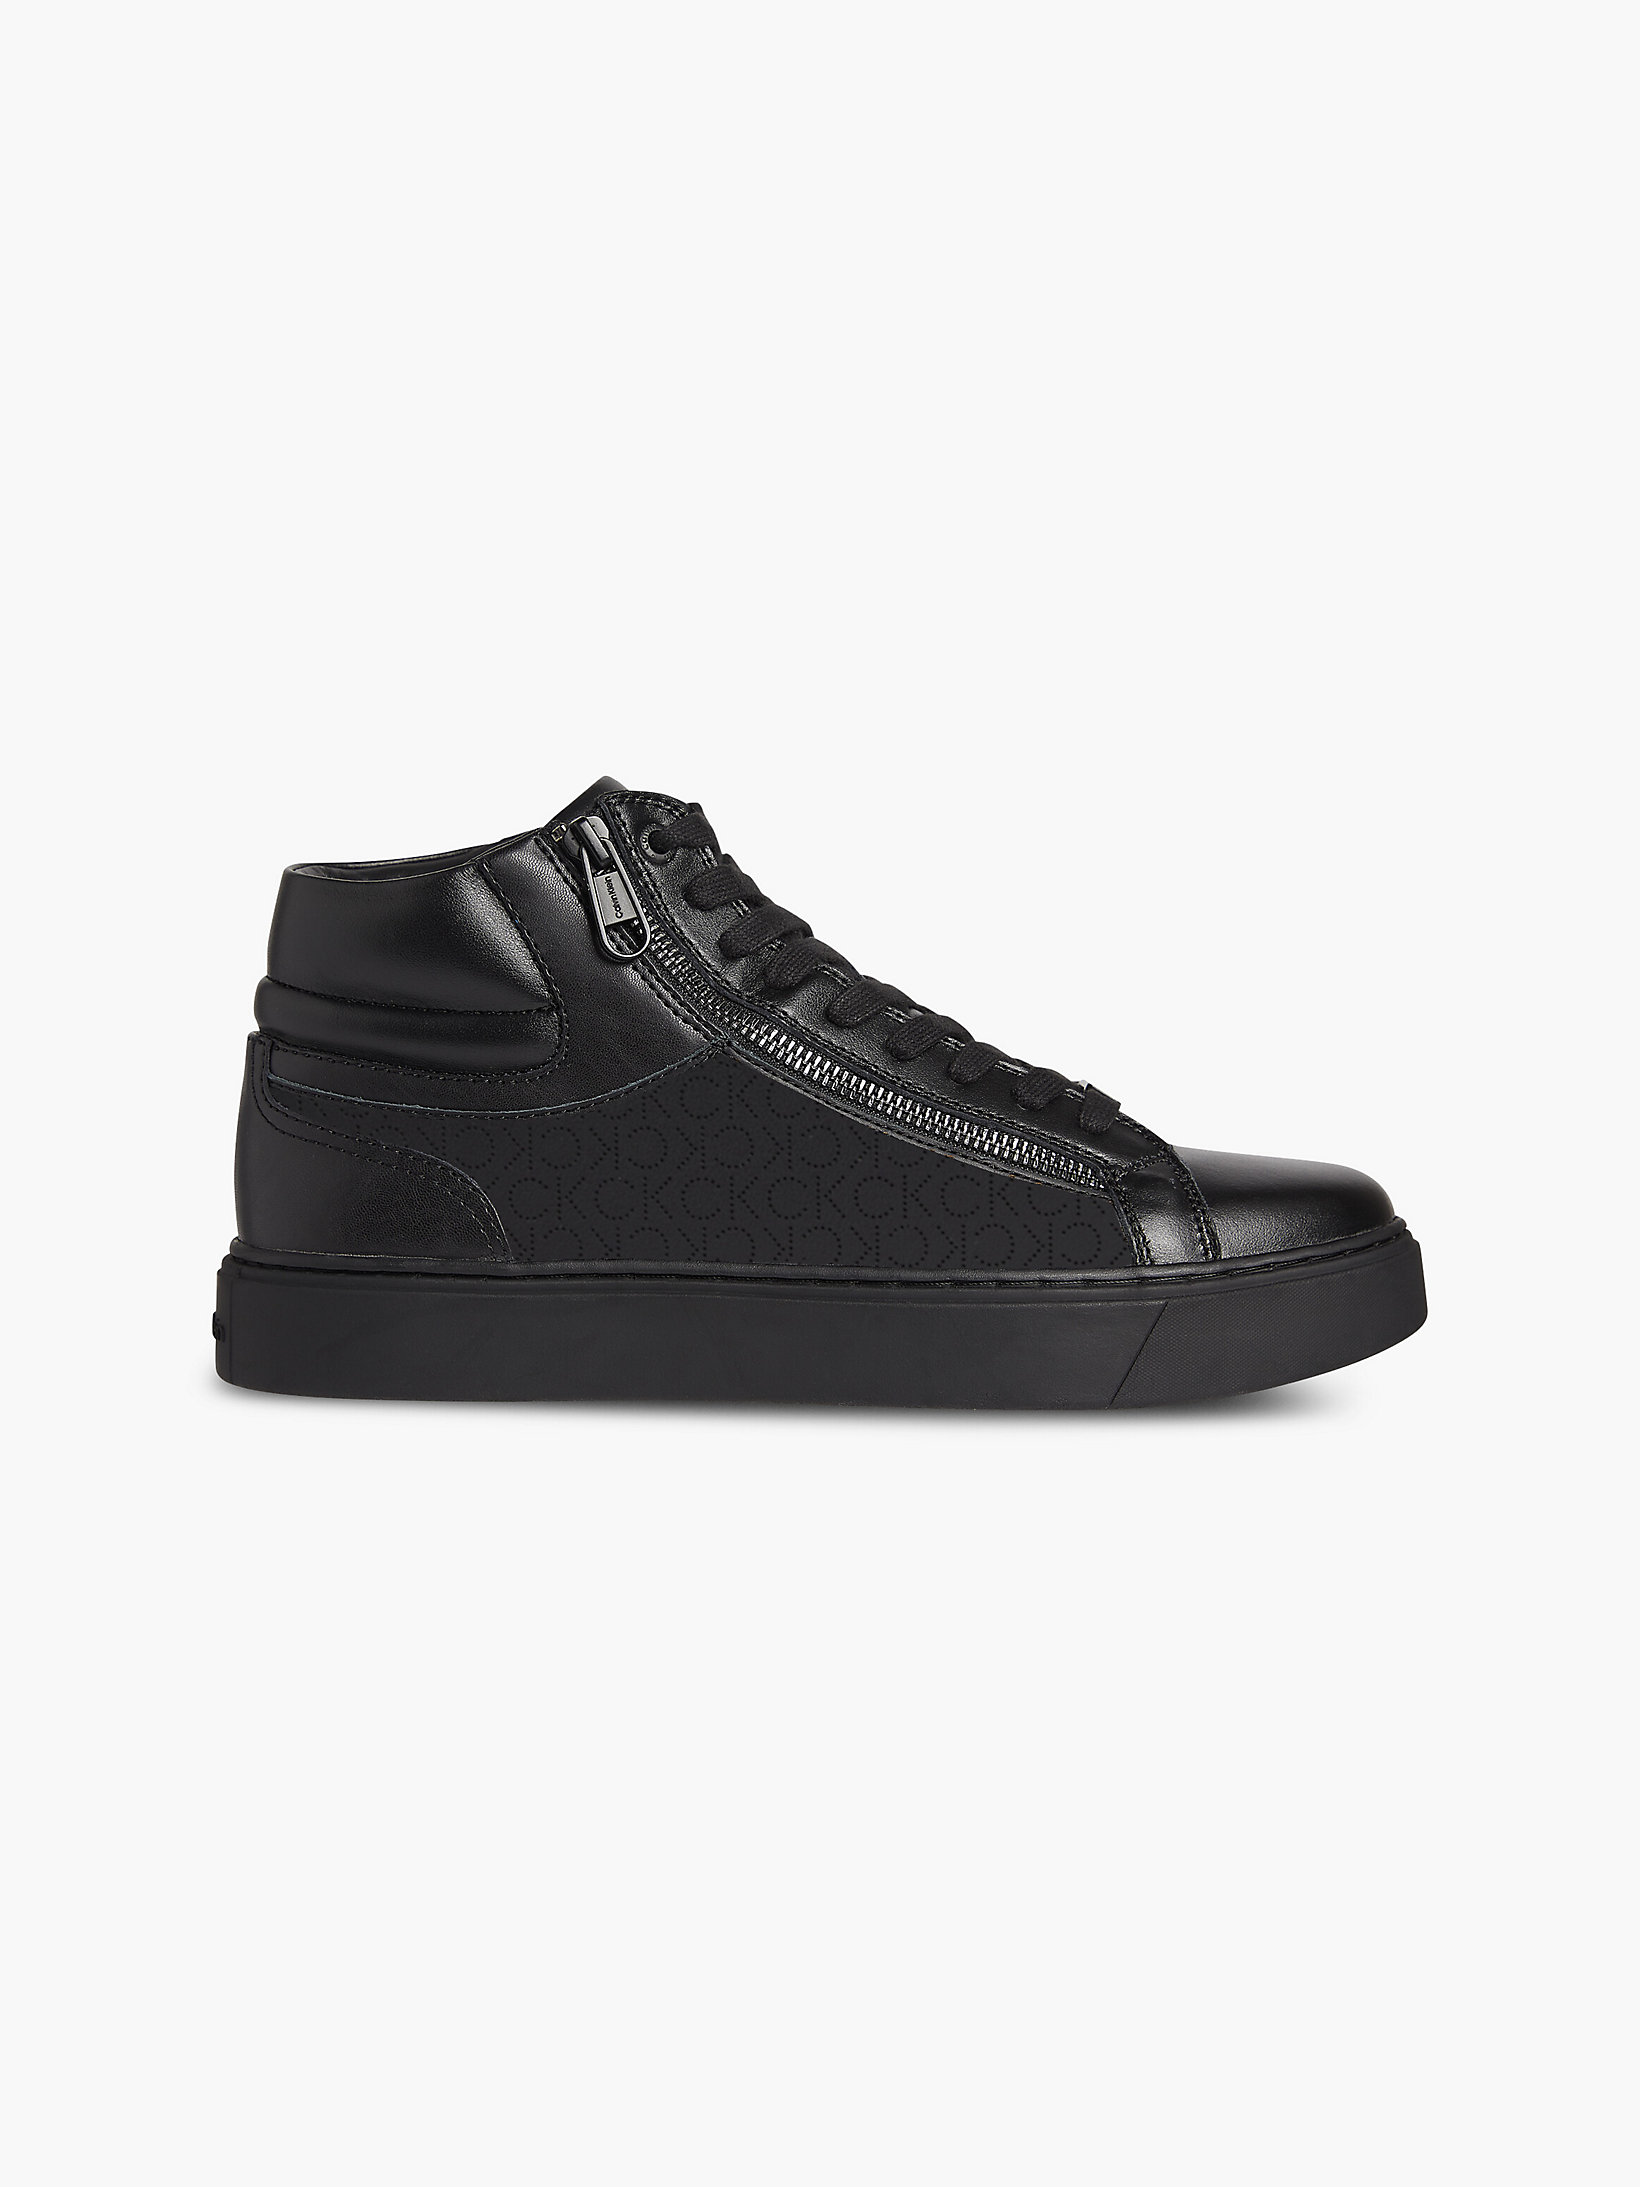 Black Mono Leather High-Top Trainers undefined men Calvin Klein